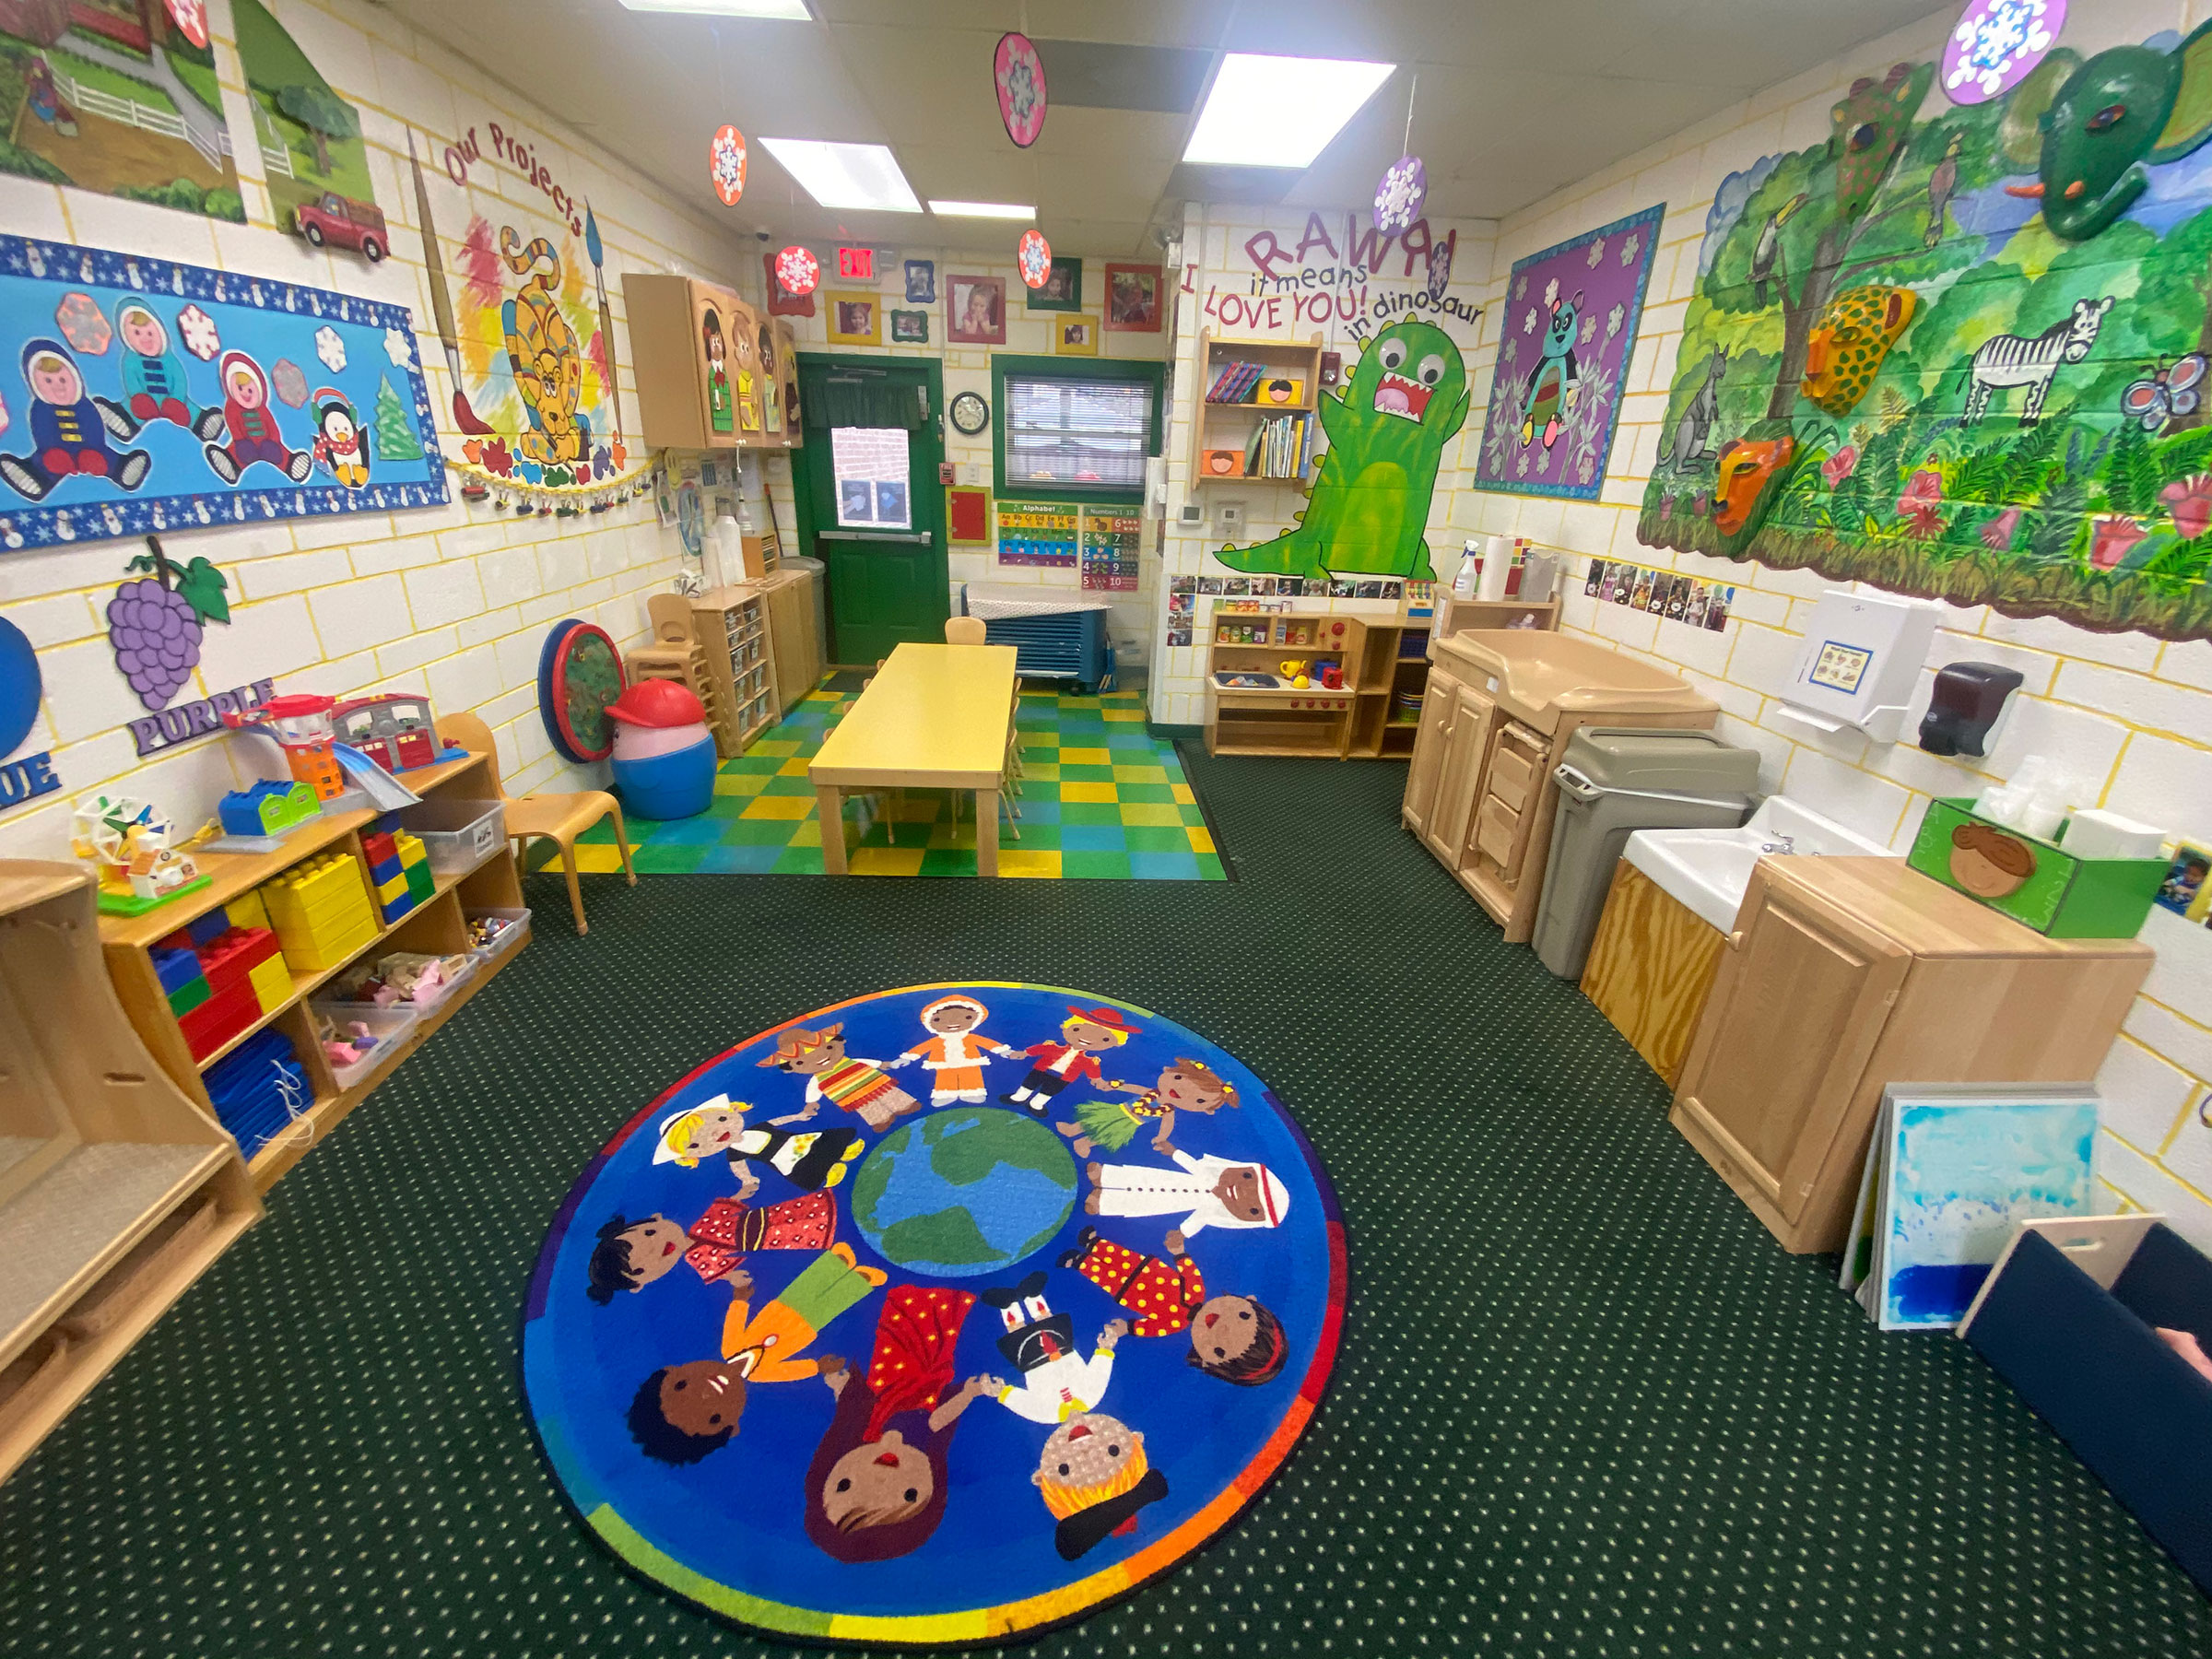 Glenview Introduction to Preschool #2